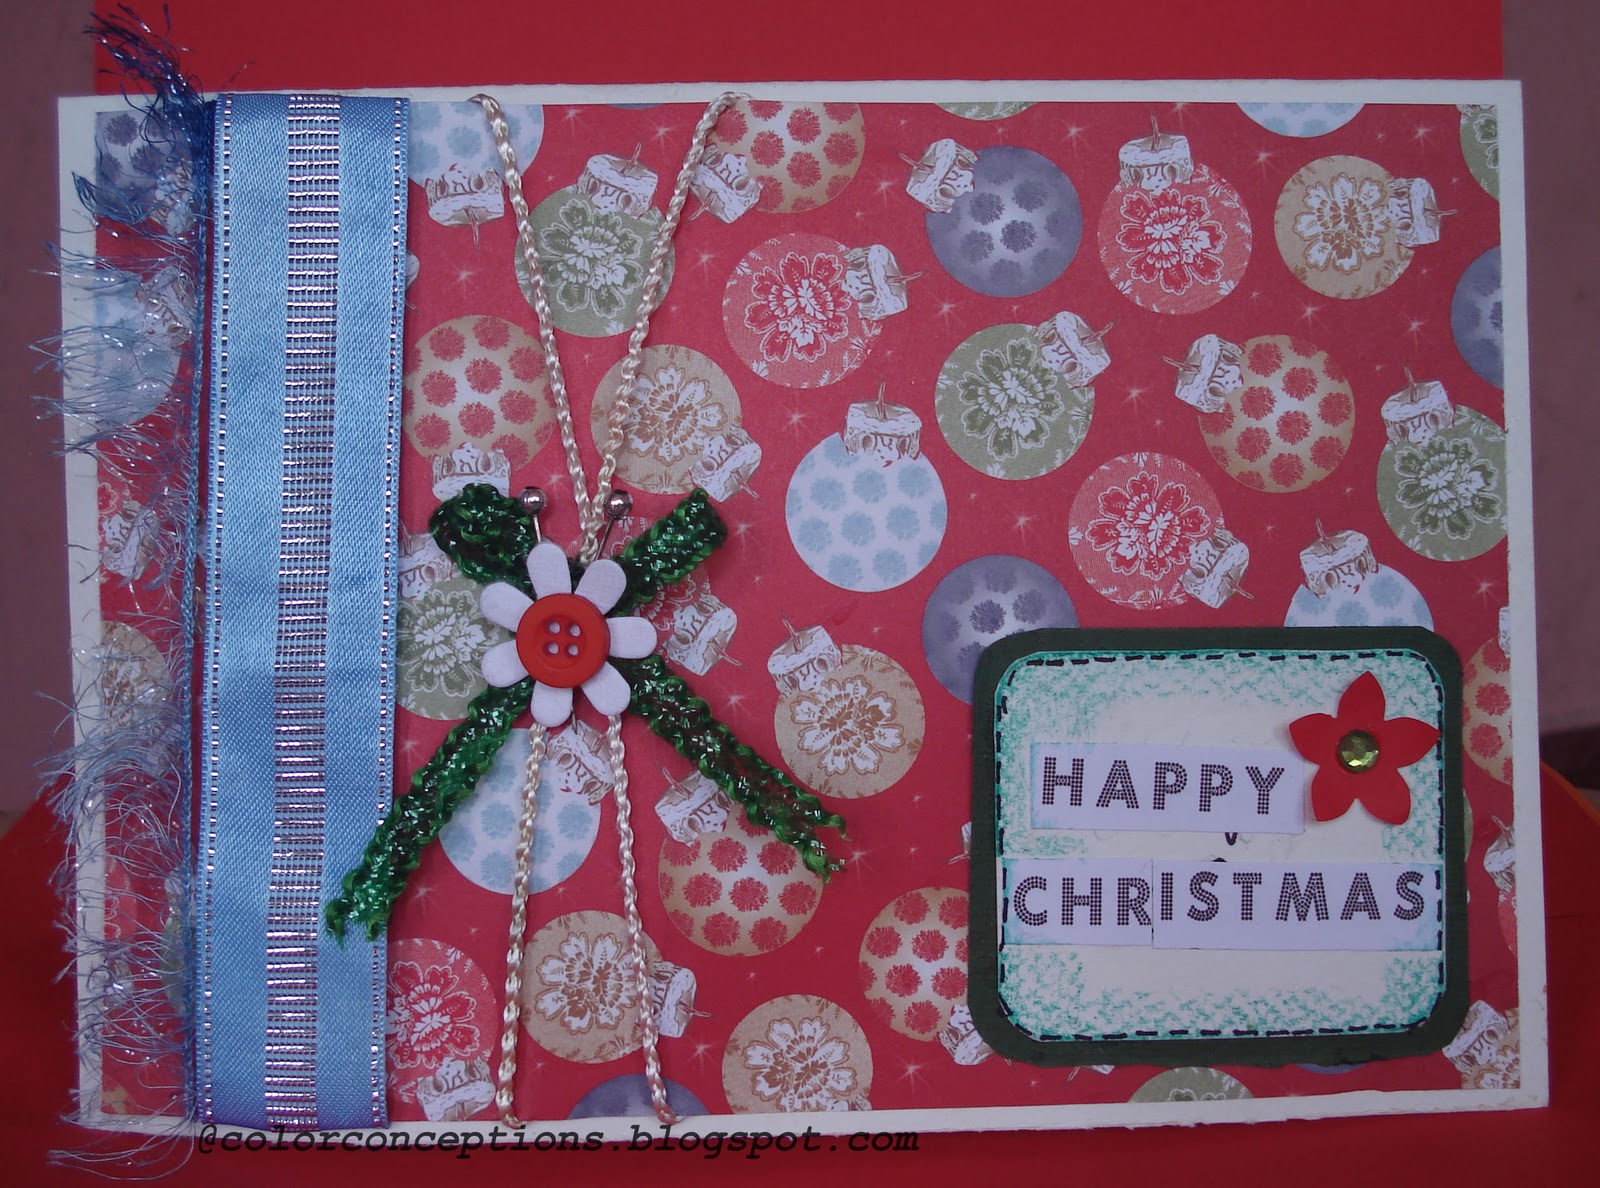 Free Christmas Card Projects and Templates at AllCrafts!